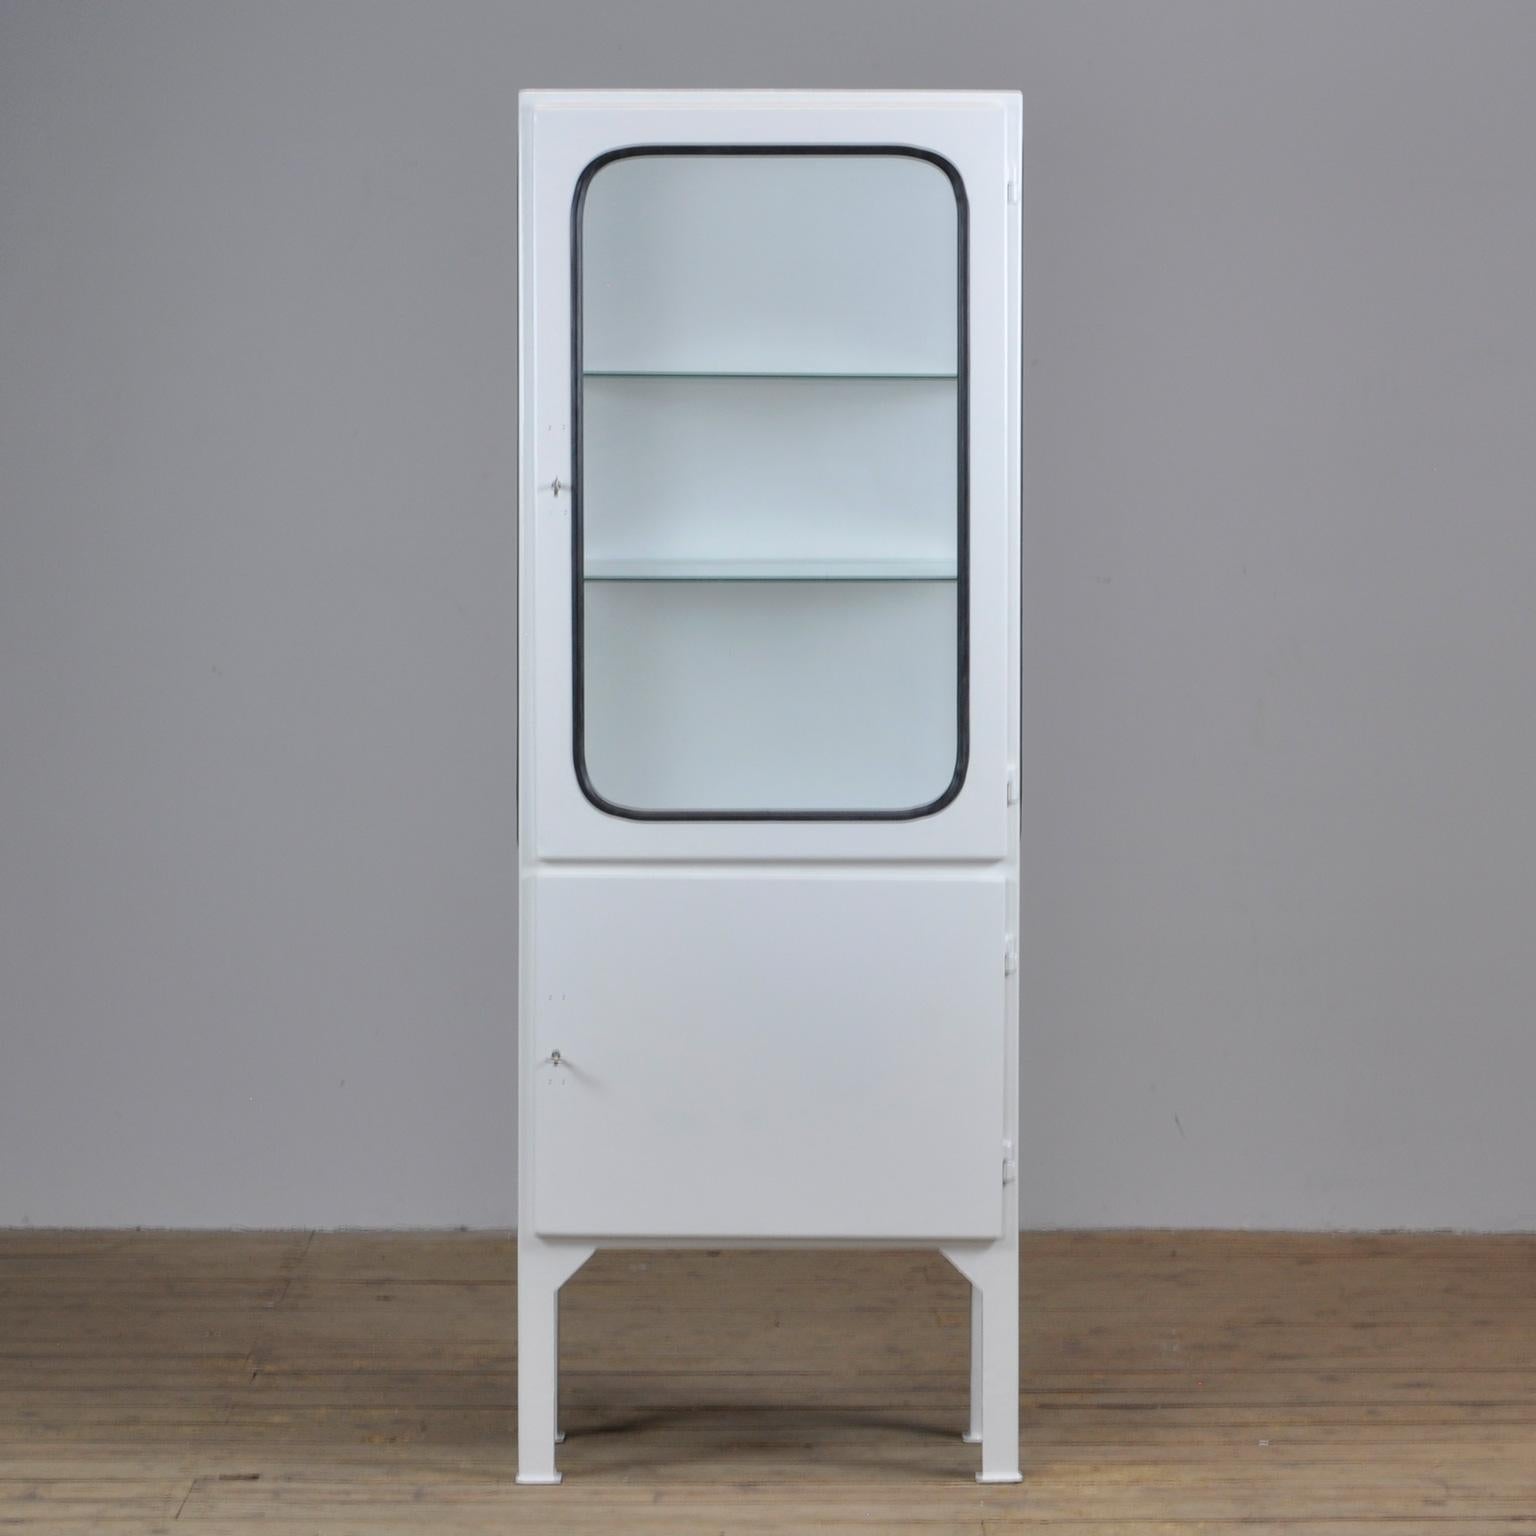 This medical cabinet was designed in the 1970s and was produced, circa 1975 in Hungary. It is made from iron and antique glass with new glass shelves. The glass is held by a black rubber strip. The cabinet features two adjustable glass shelves and